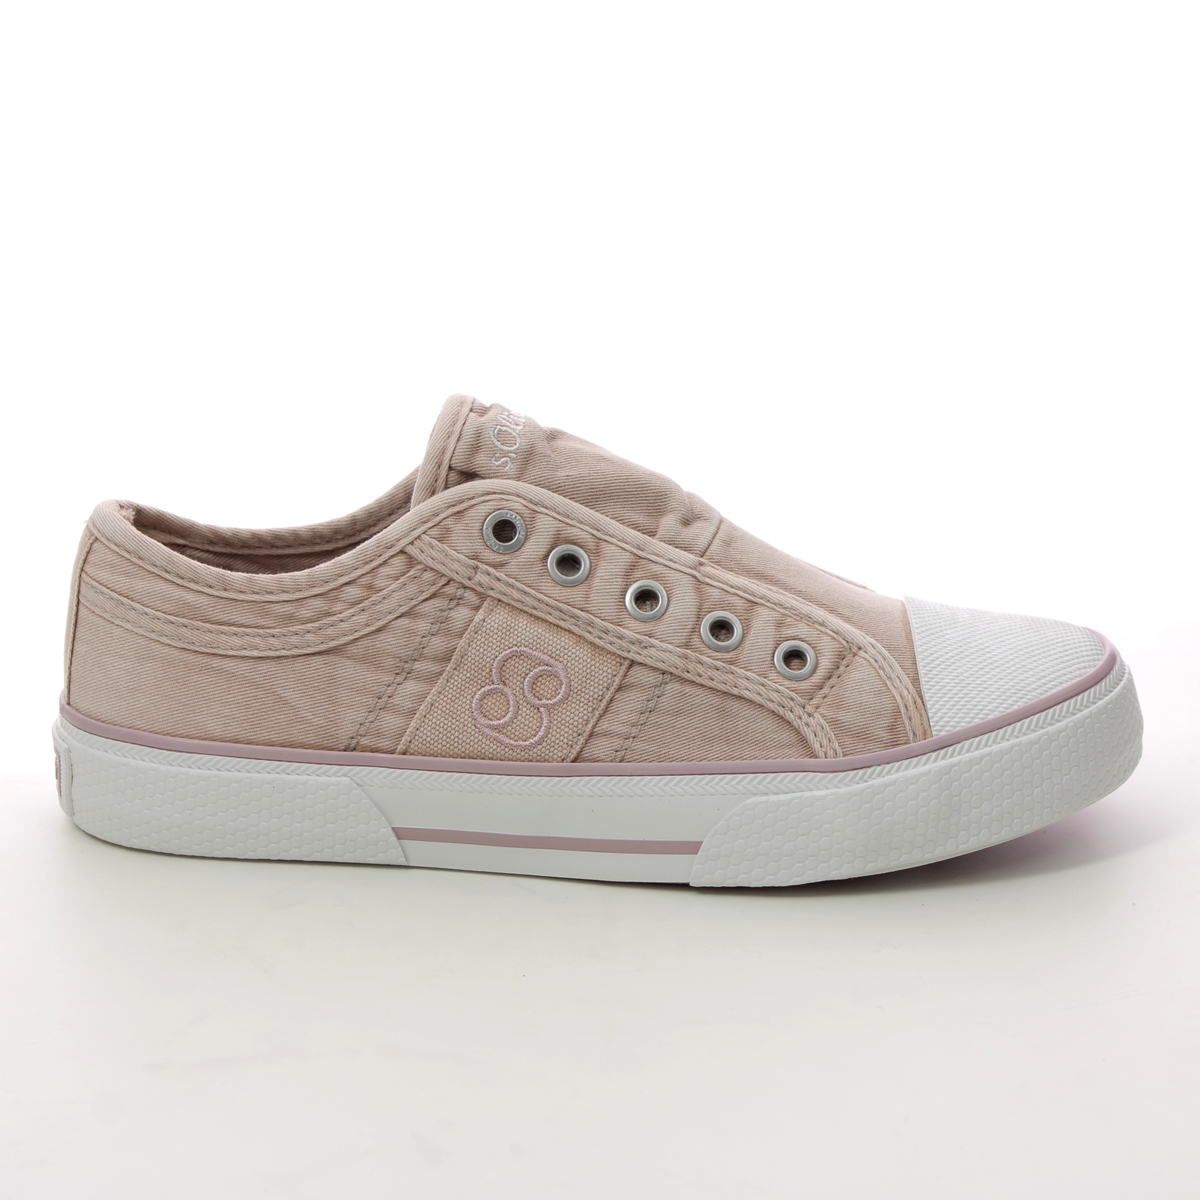 S Oliver Mustang Rose pink 31 Womens 24635-30544 trainers